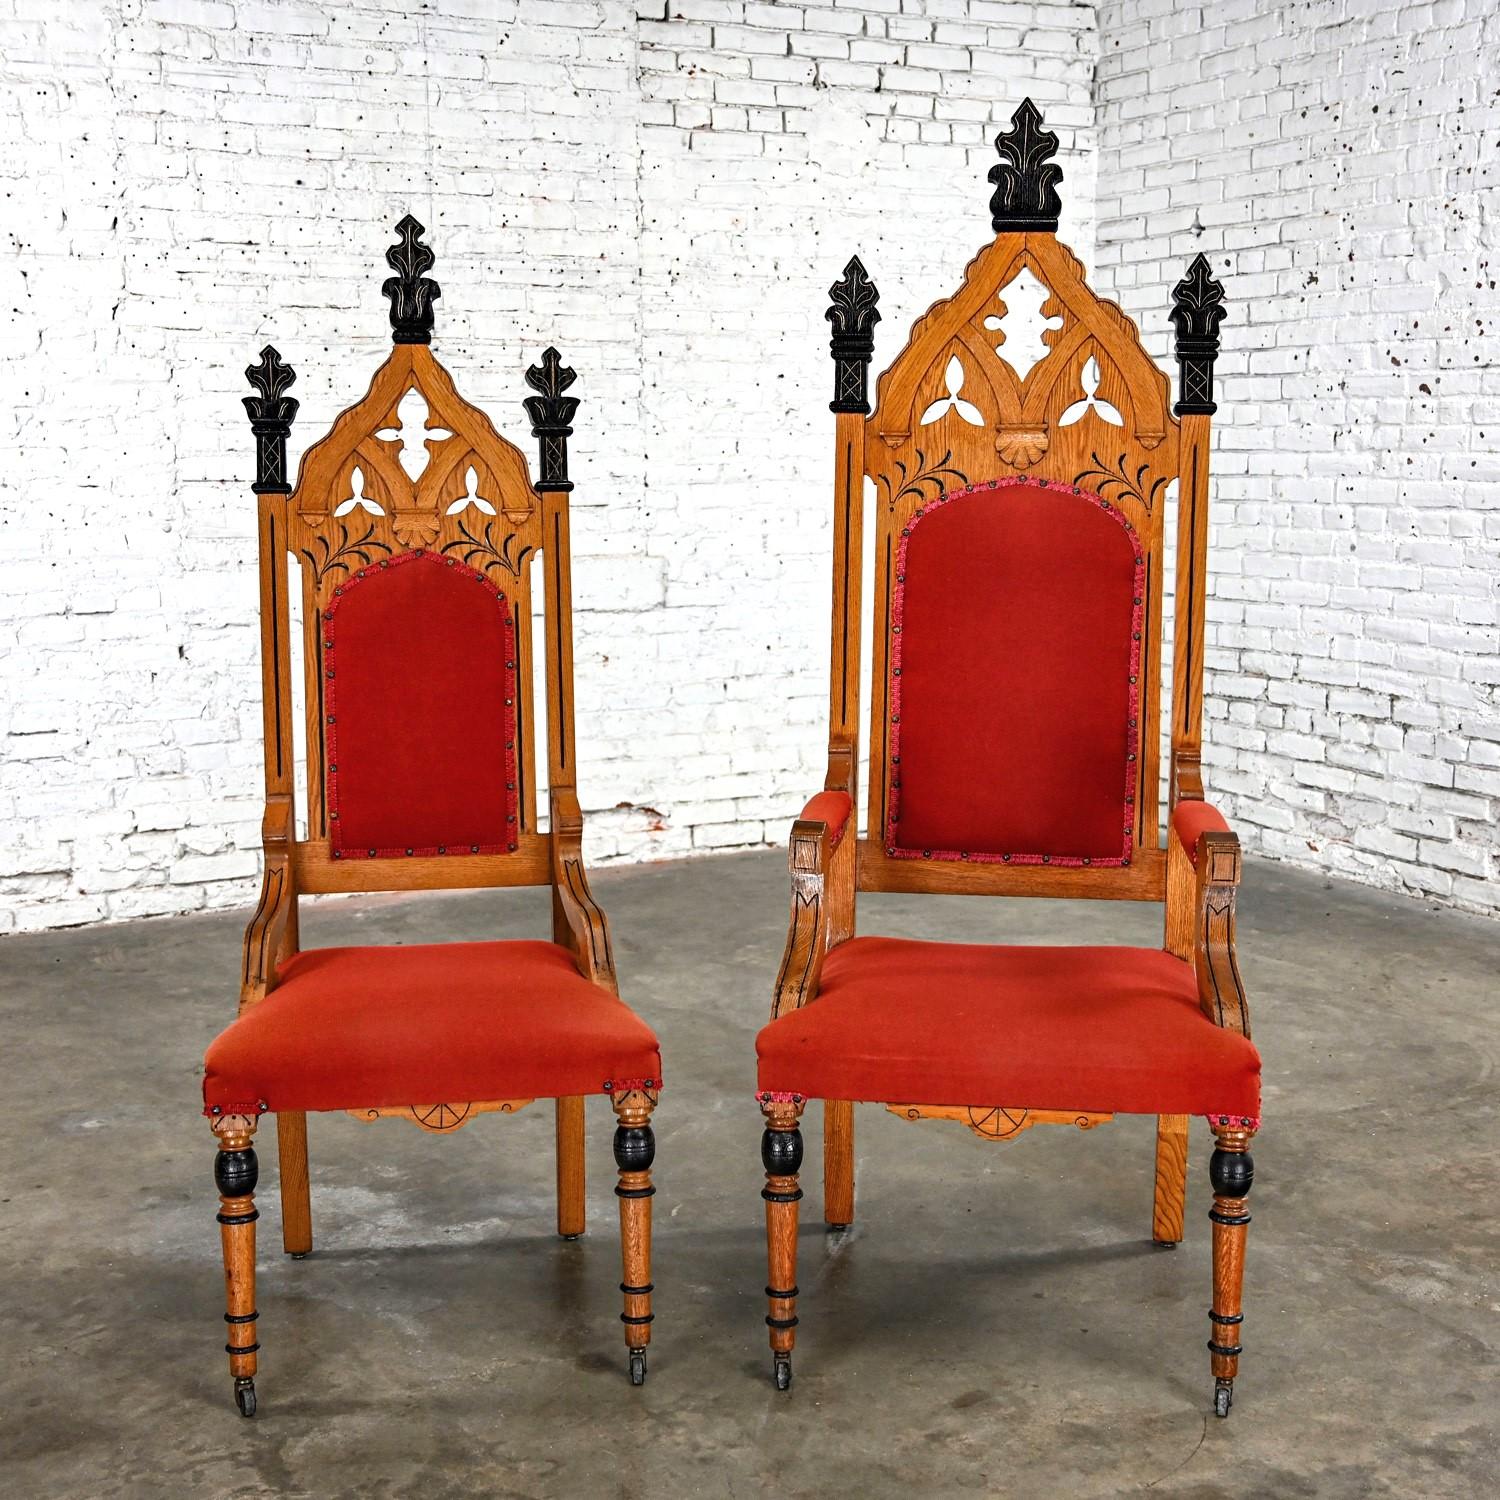 Oak Victorian or Gothic Revival Ecclesiastical His & Hers Throne Chairs a Pair For Sale 11